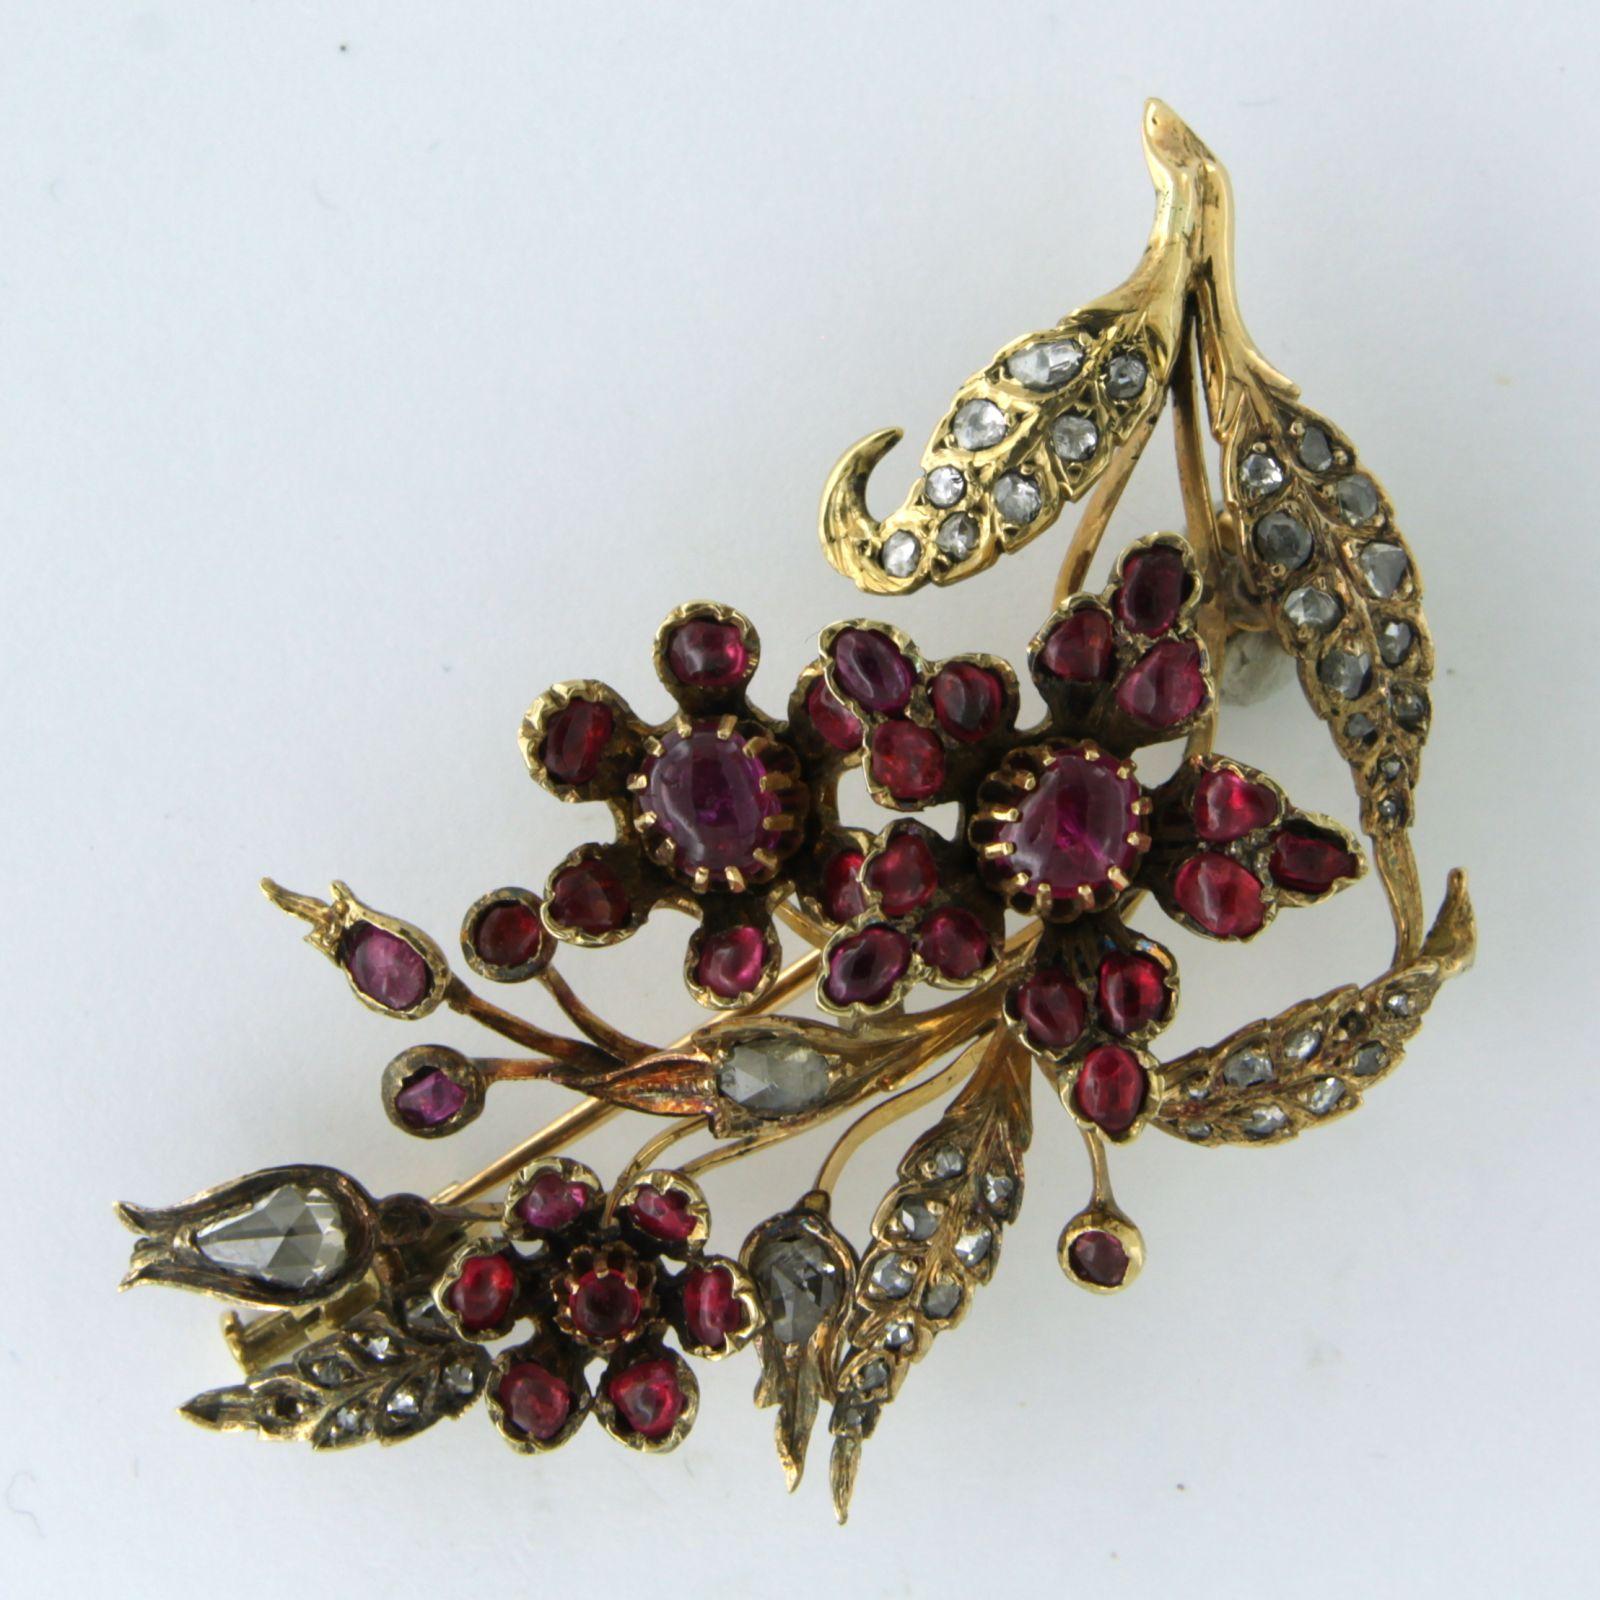 18k yellow gold branch brooch set with ruby ​​and diamonds. 0.50ct - G/H - SI - dim. 5.5 cm x 3.0 cm

detailed description:

the size of the brooch is 5.5 cm by 3.0 cm wide

weight 13.8 grams

set with

- 34 x round and oval cabochon cut ruby

color